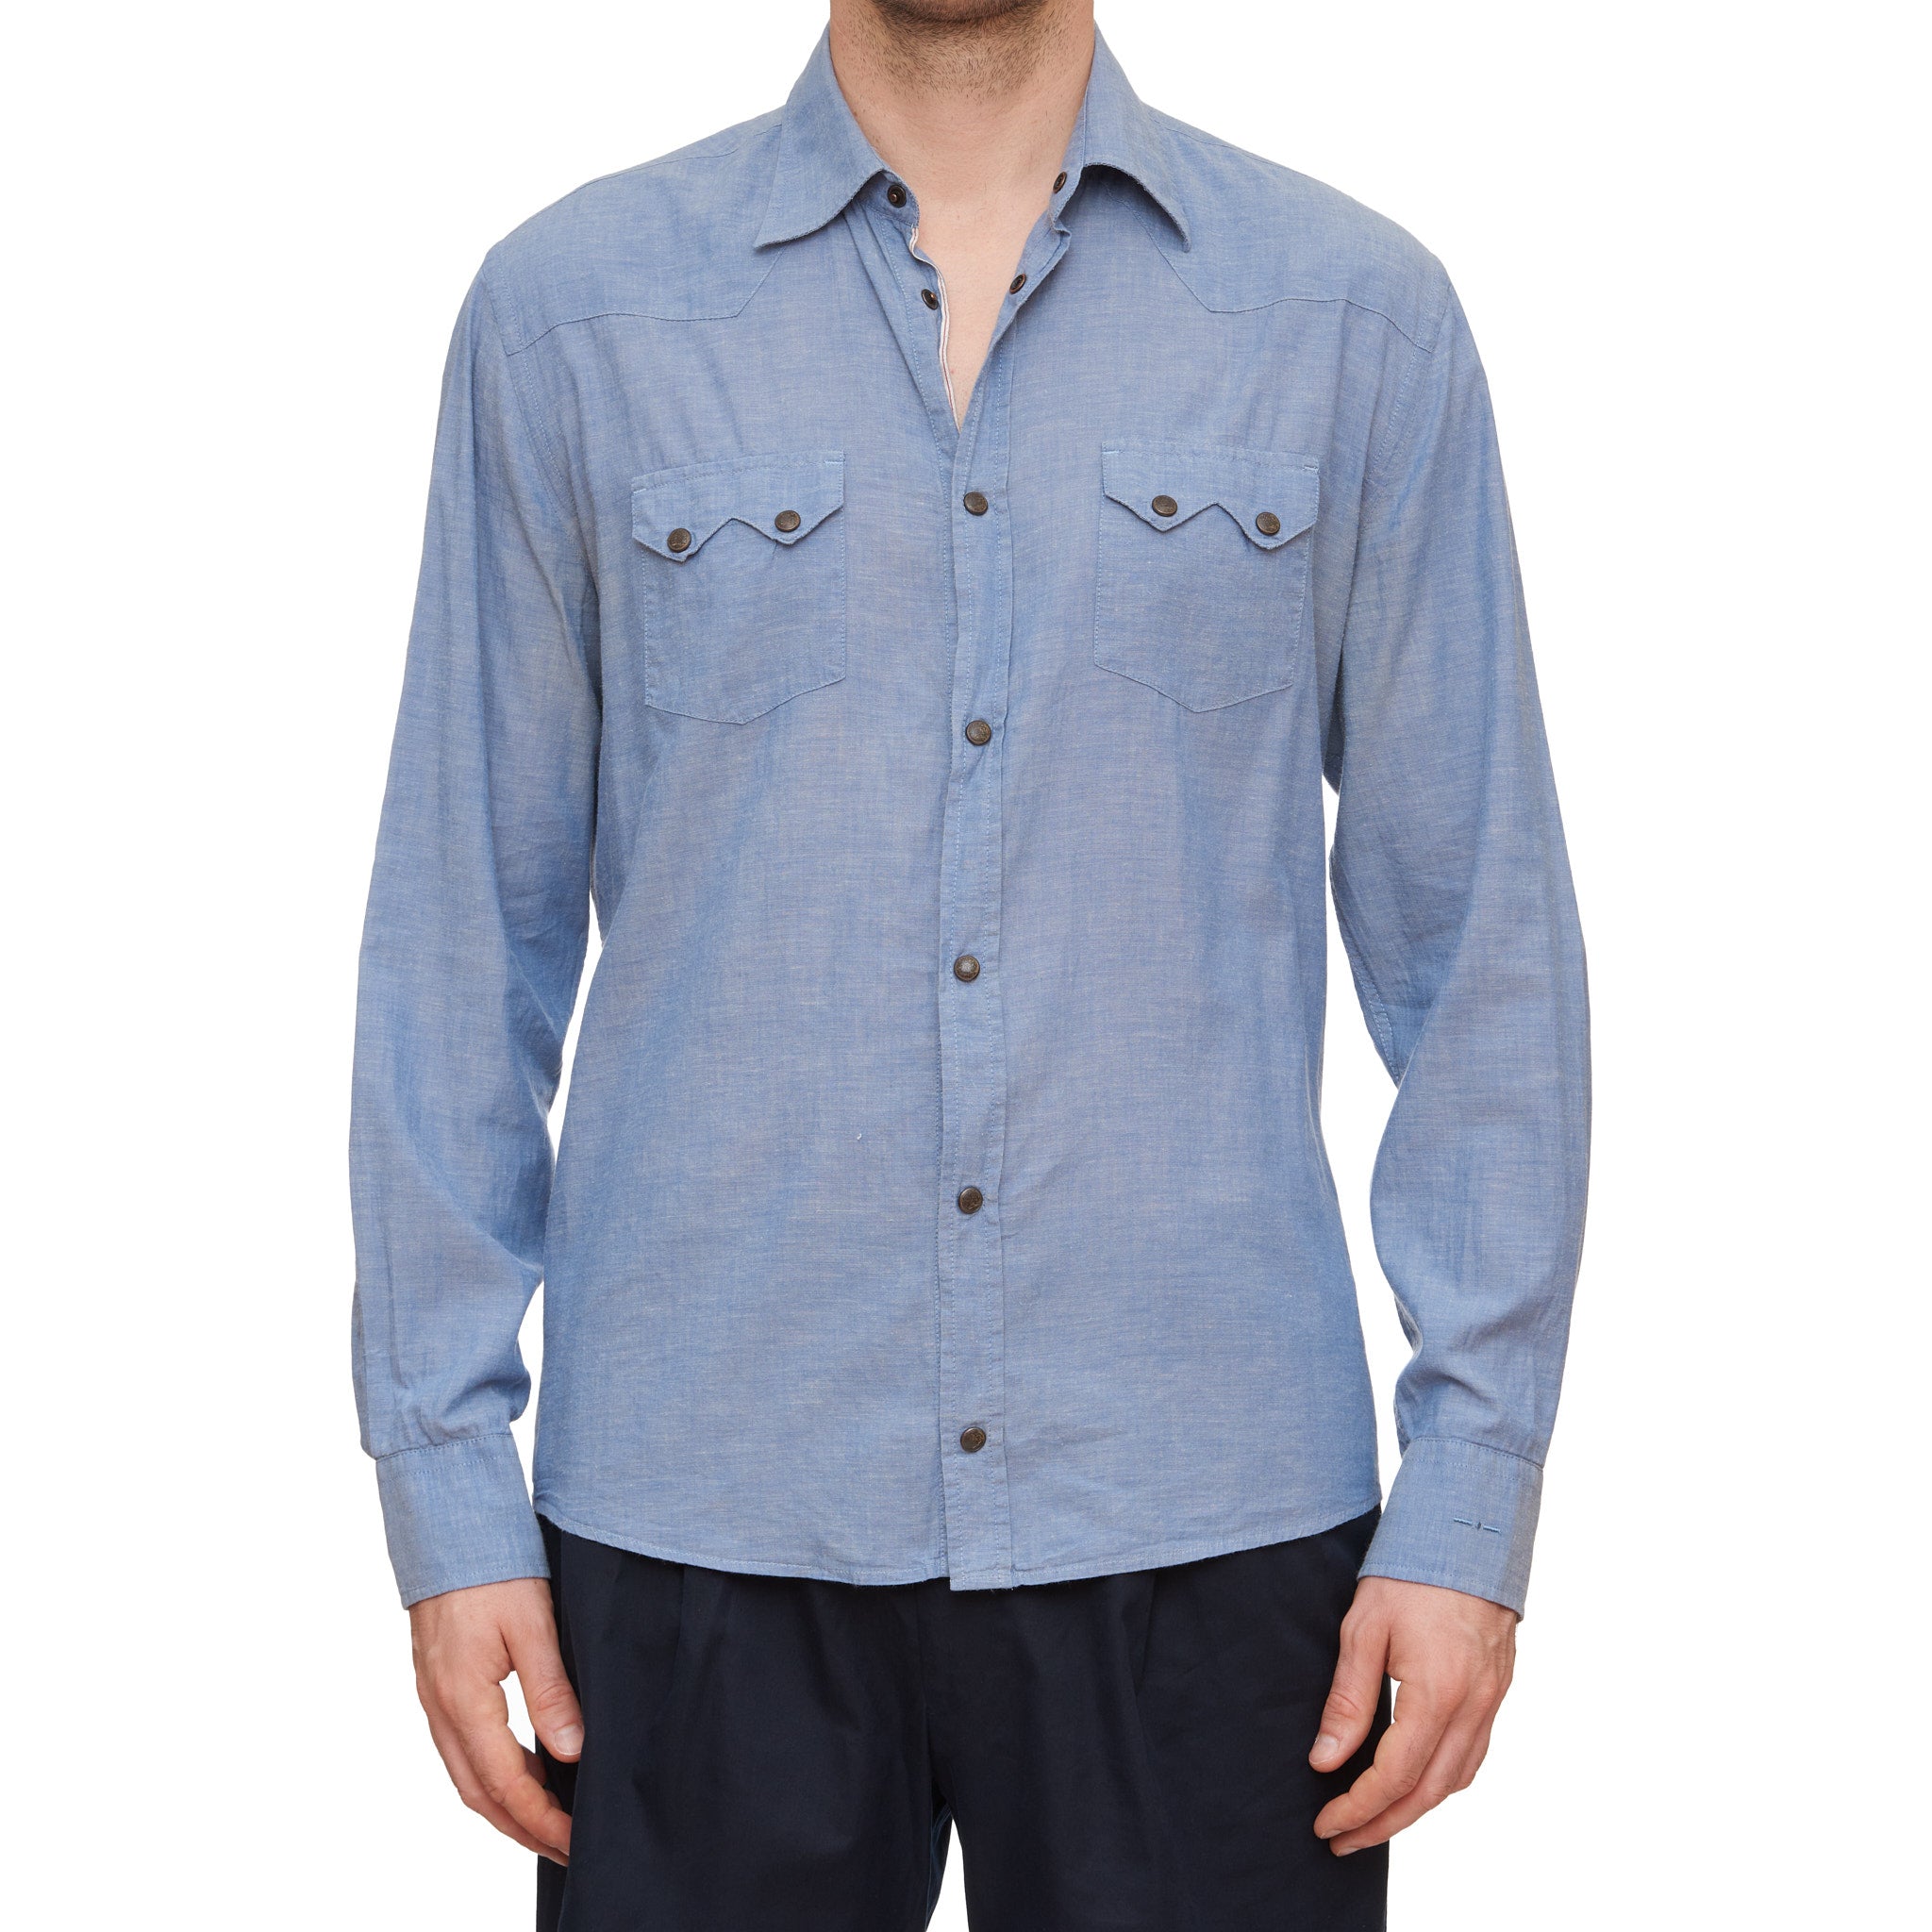 Lapo Elkann's ITALIA INDEPENDENT Chambray Selvedge Western Casual Shirt Size XL Slim Fit